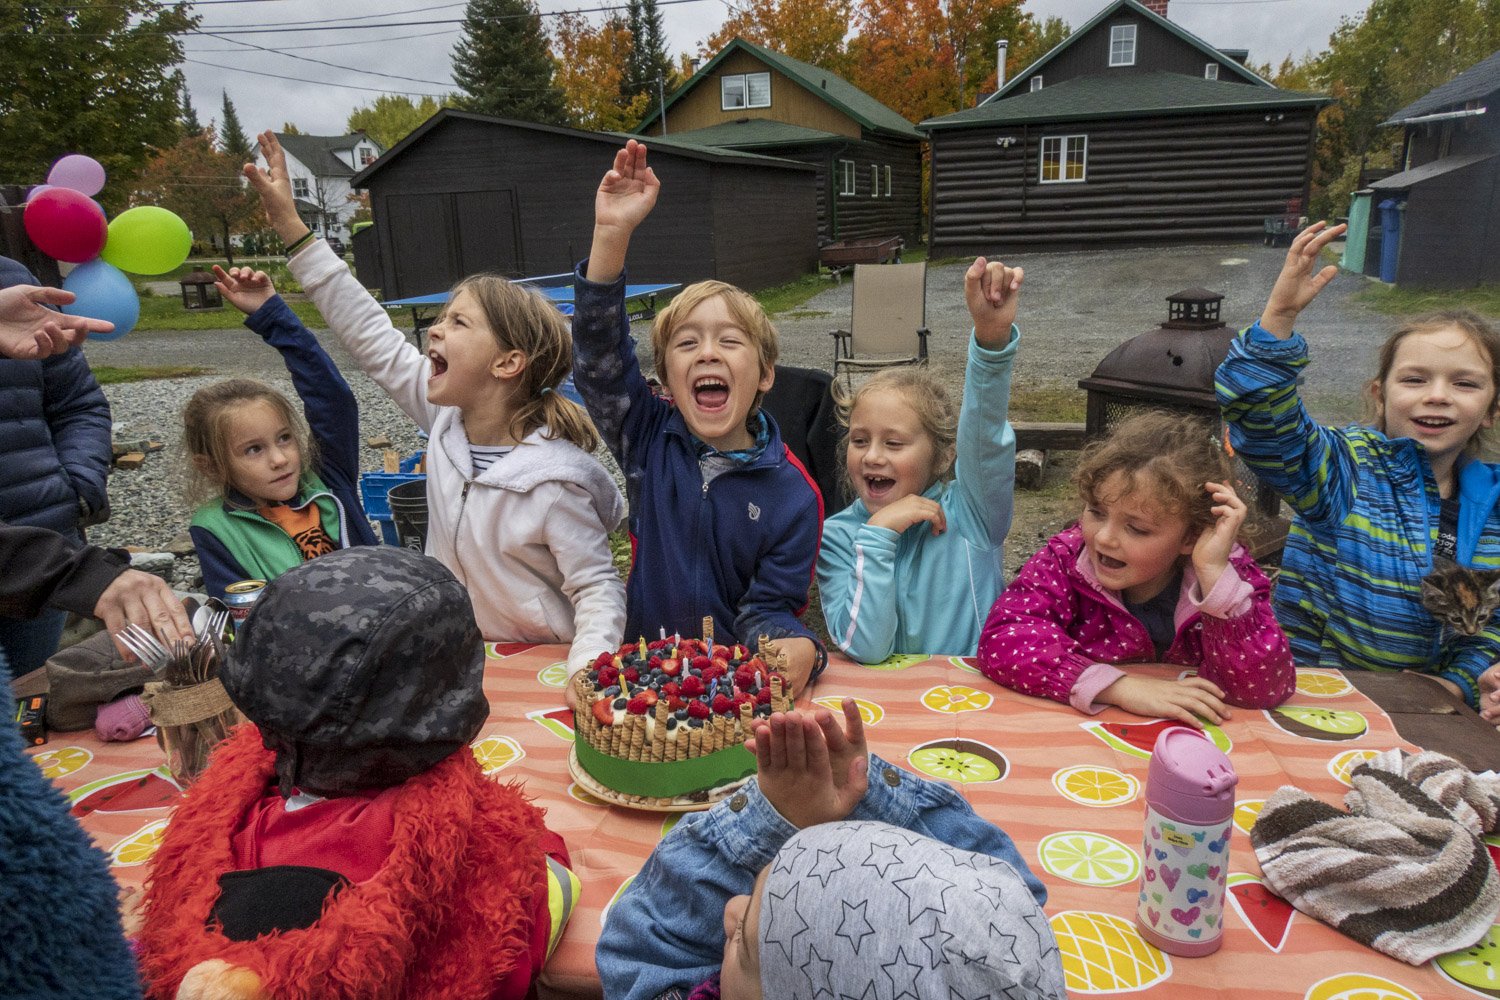  Kids celebrates at an outdoor birthday party in the mining village of Bourlamaque. After the mine closed in 1985 more families with incomes not tied to the Lamaque mine or the mining industry moved into the historic neighbourhood. 